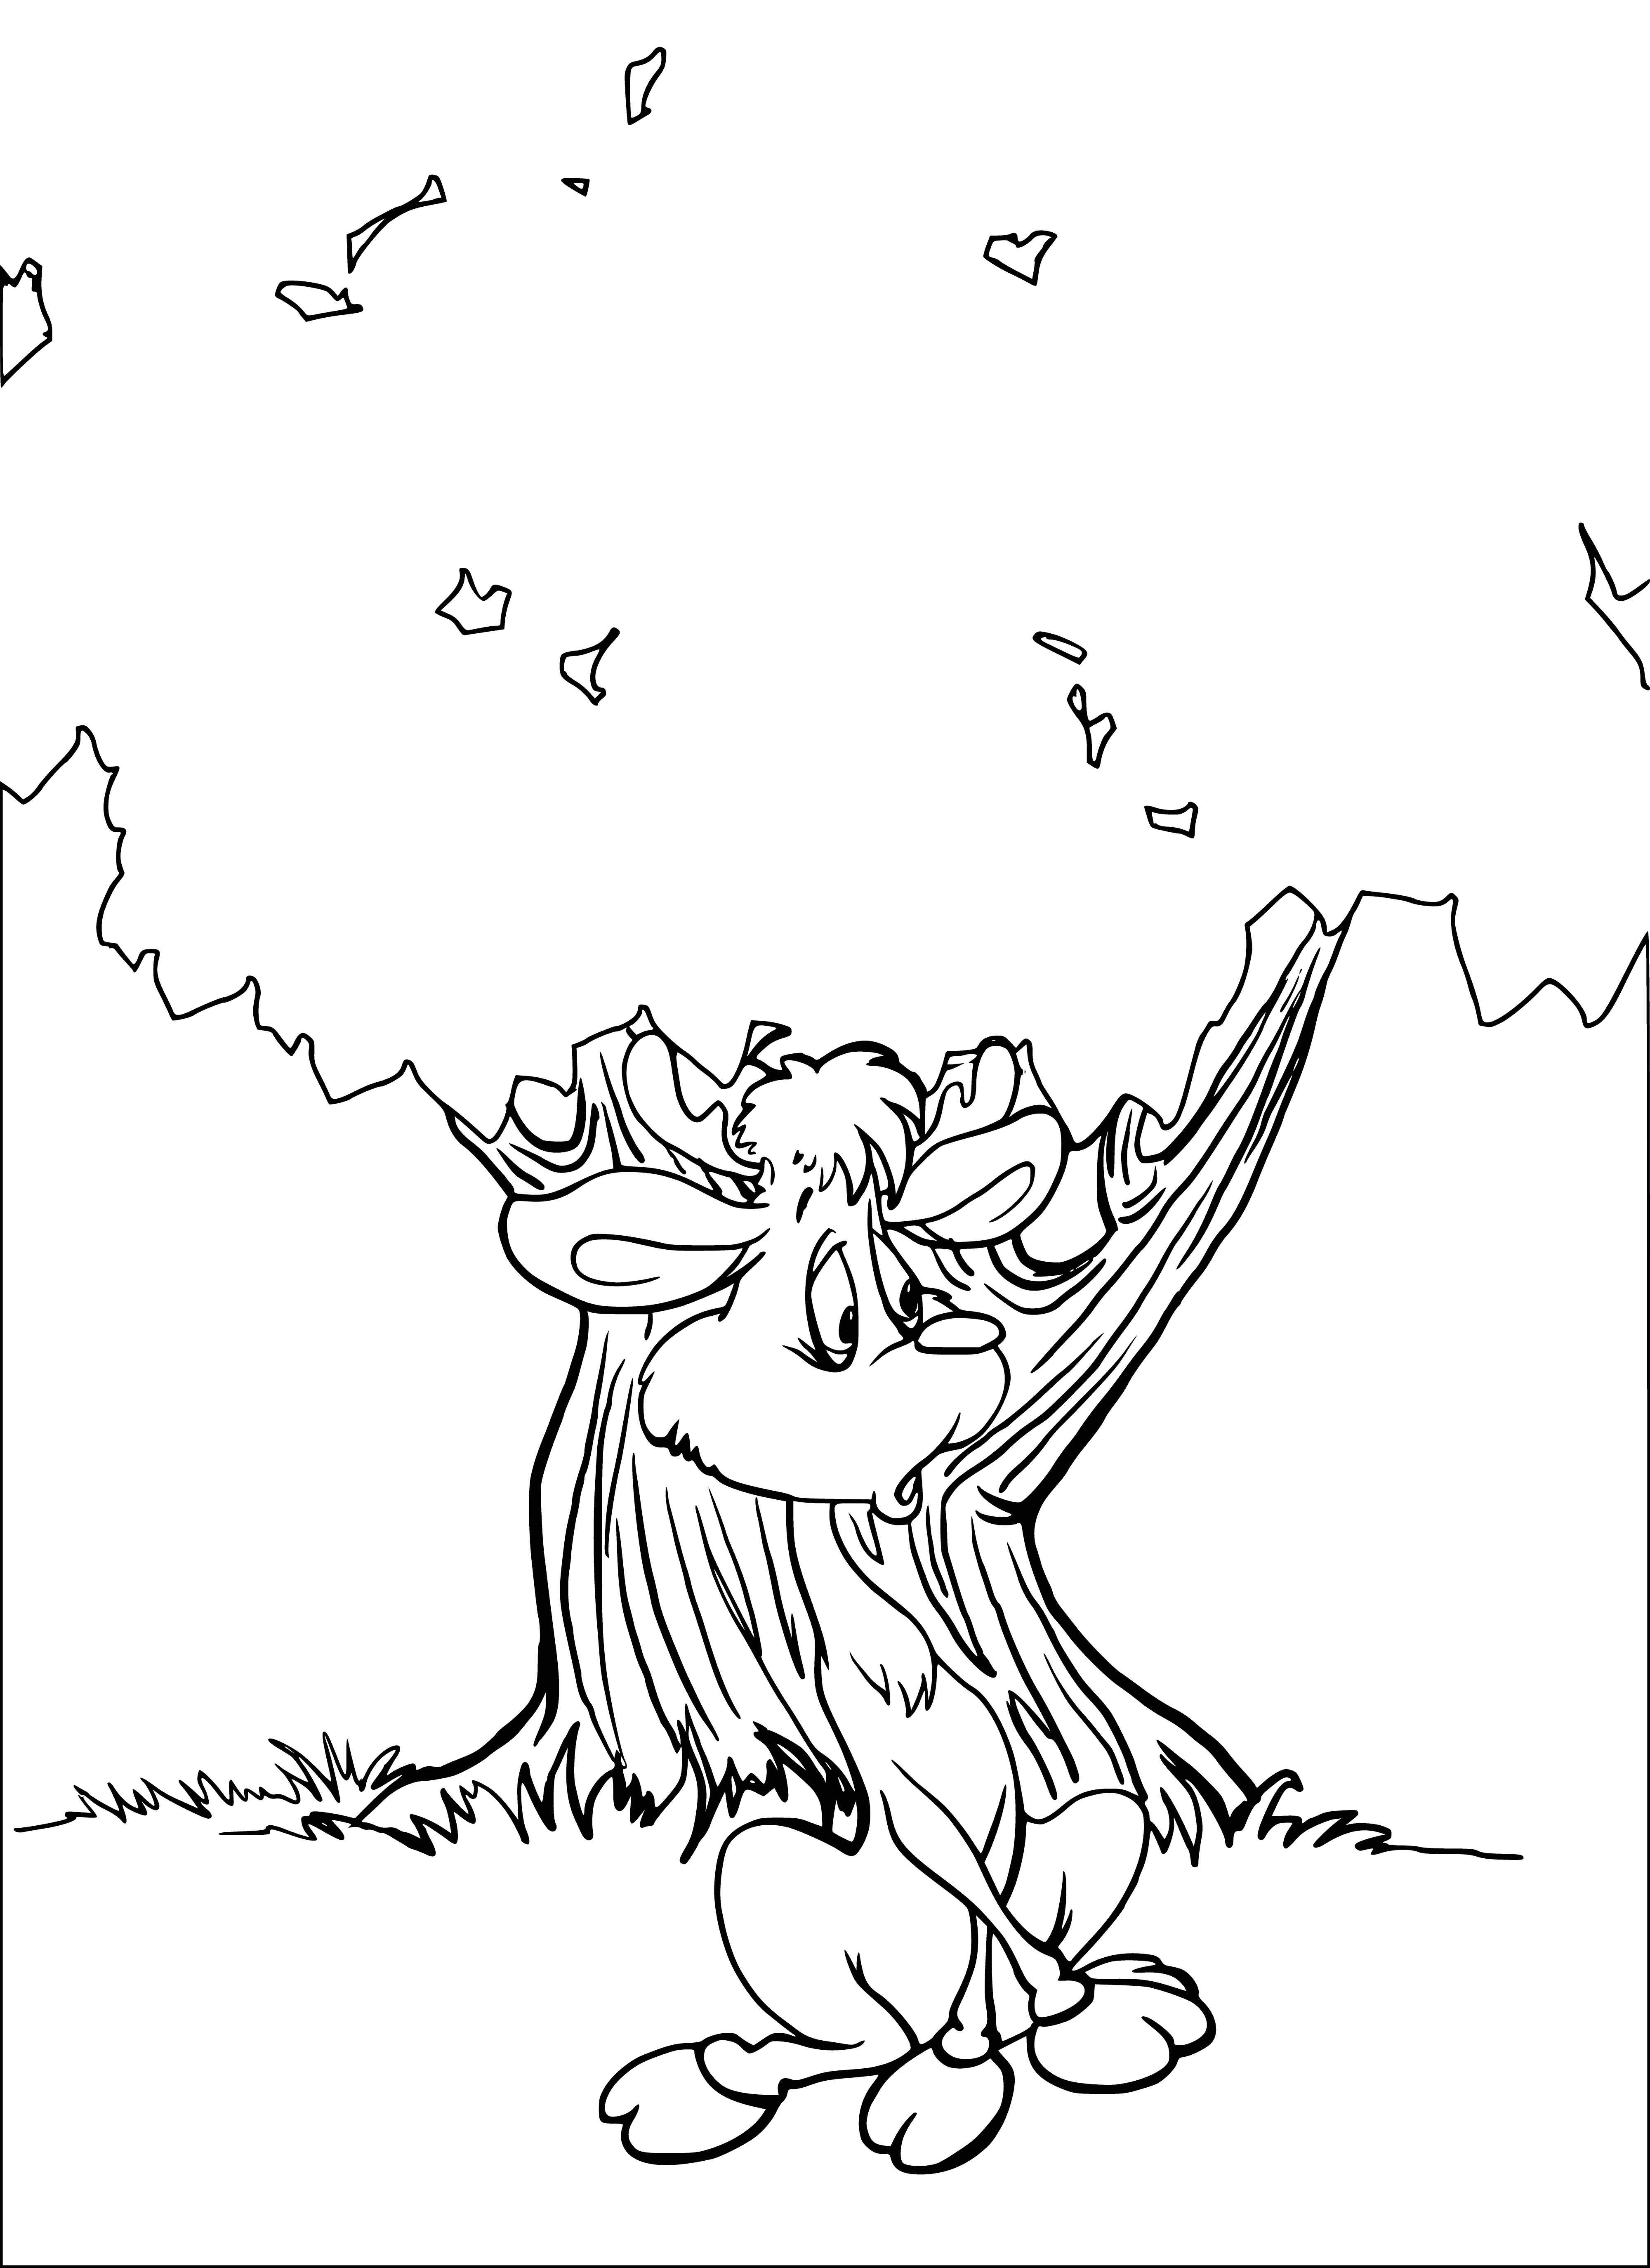 Fawn Sun coloring page